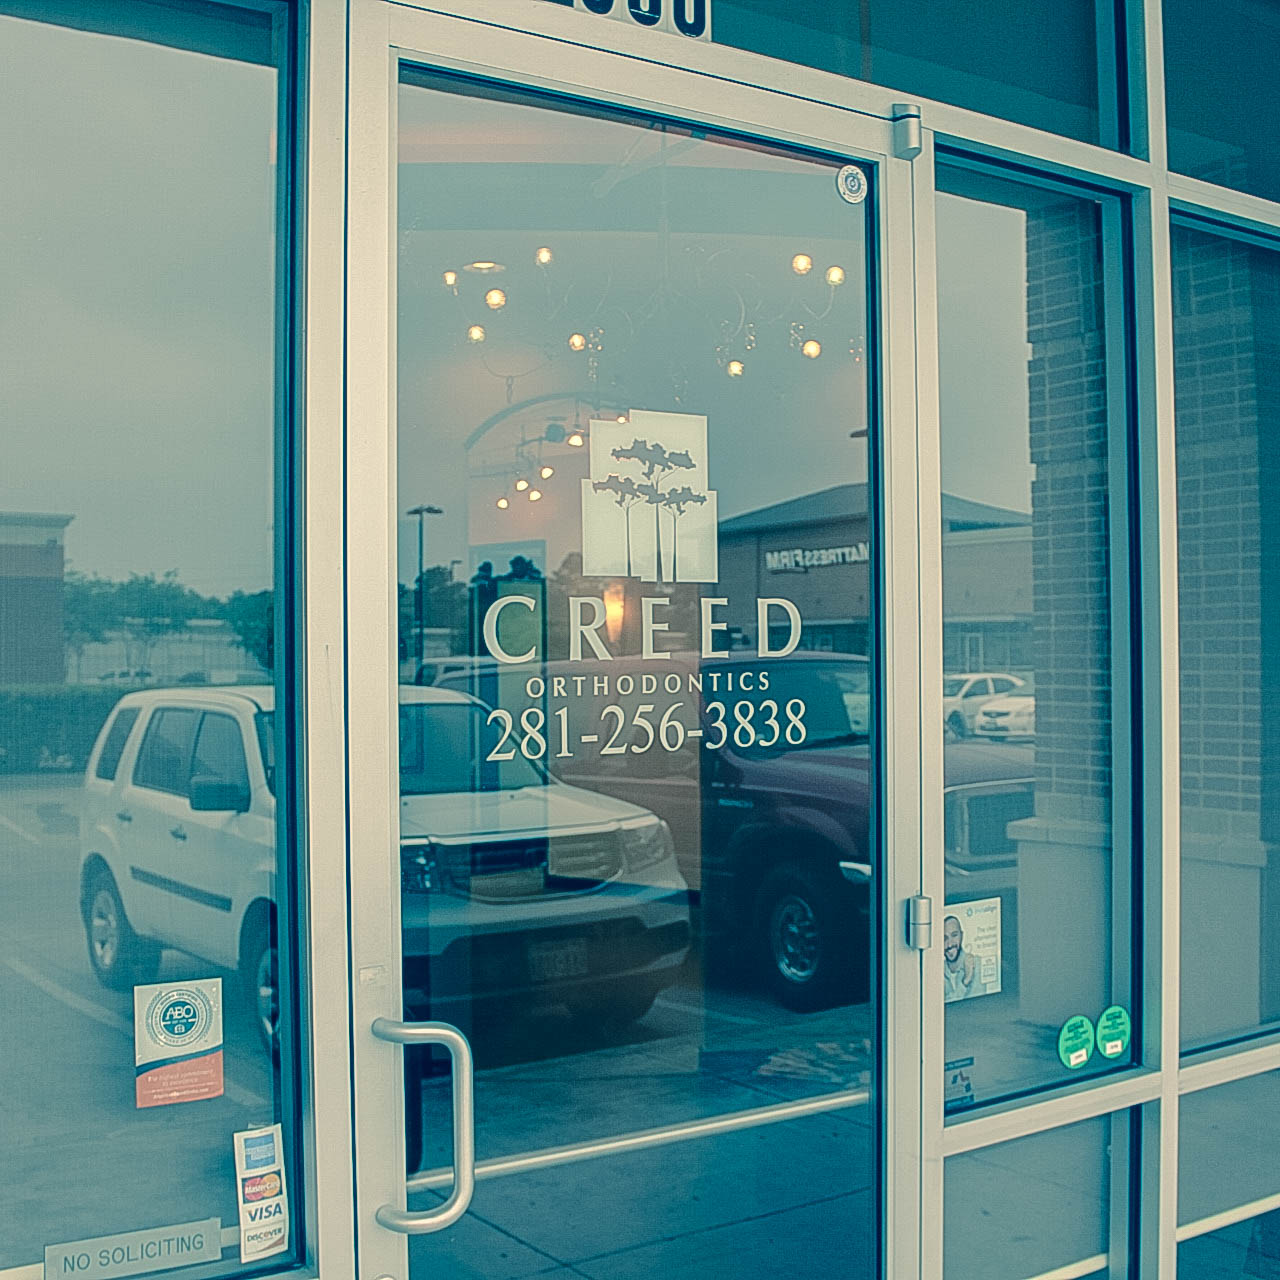 Creed Orthodontics in Cypress Texas - Front Entrance